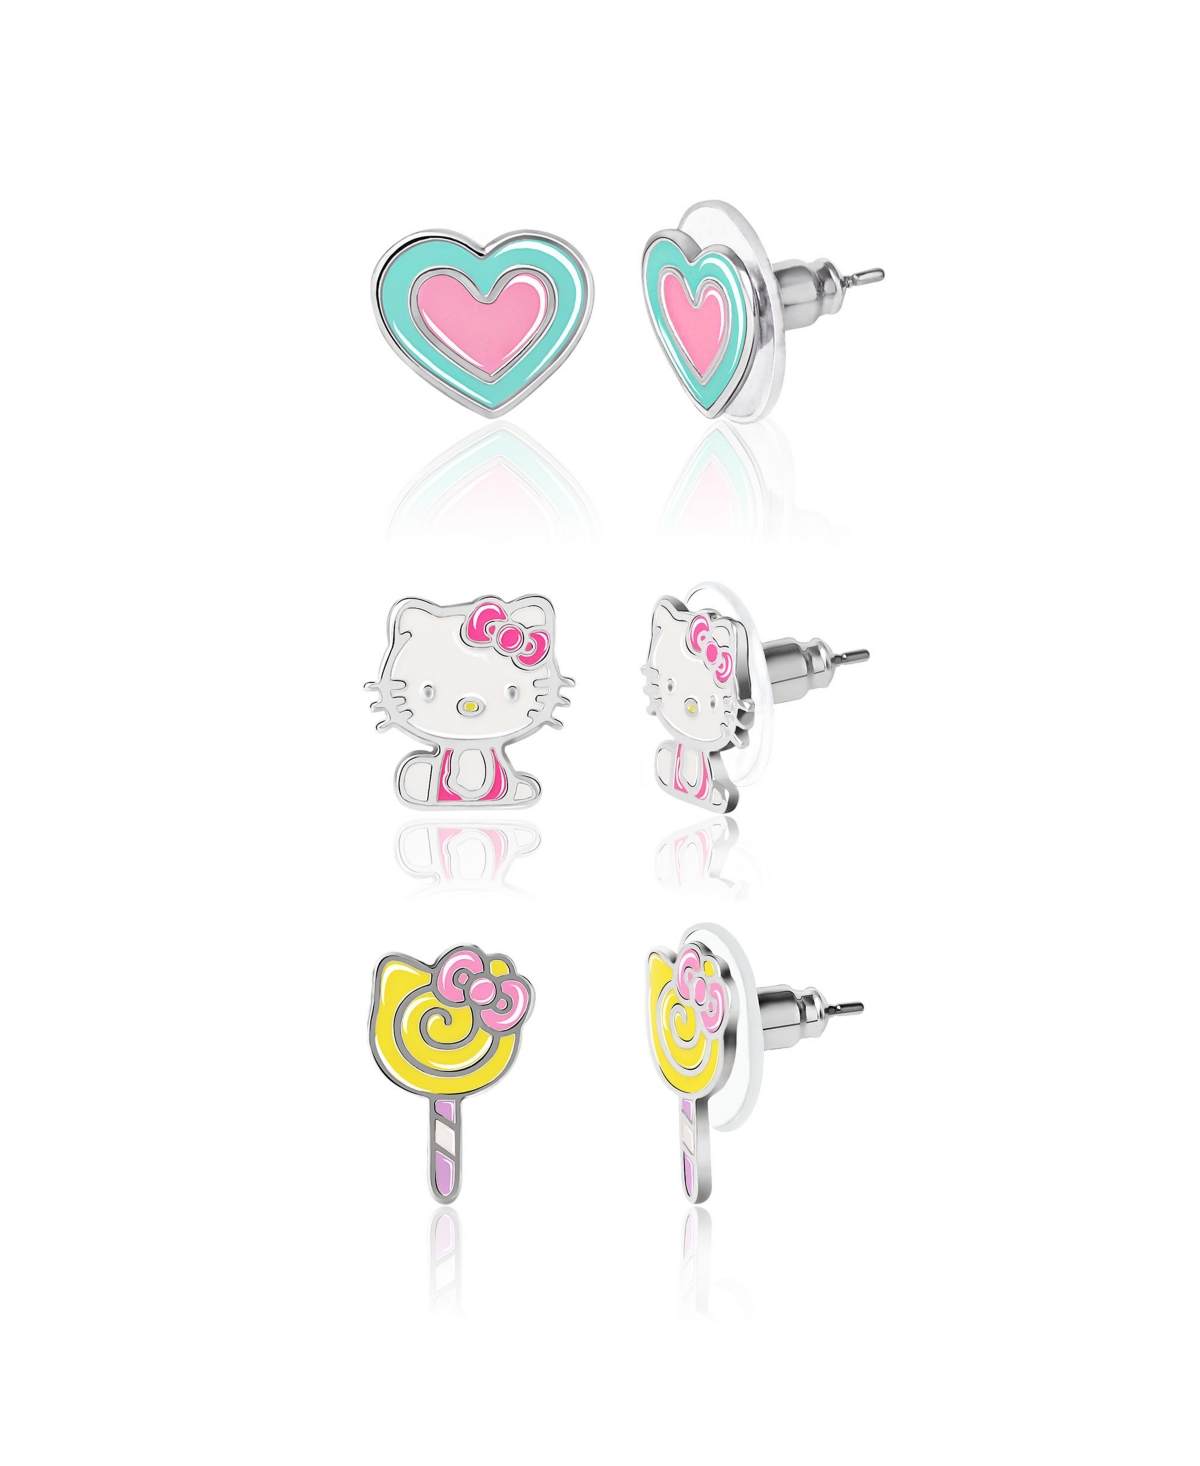 Sanrio Hello Kitty Heart, Lollipop Stud Earrings Set - 3 Pairs, Officially Licensed - Pink, blue, yellow